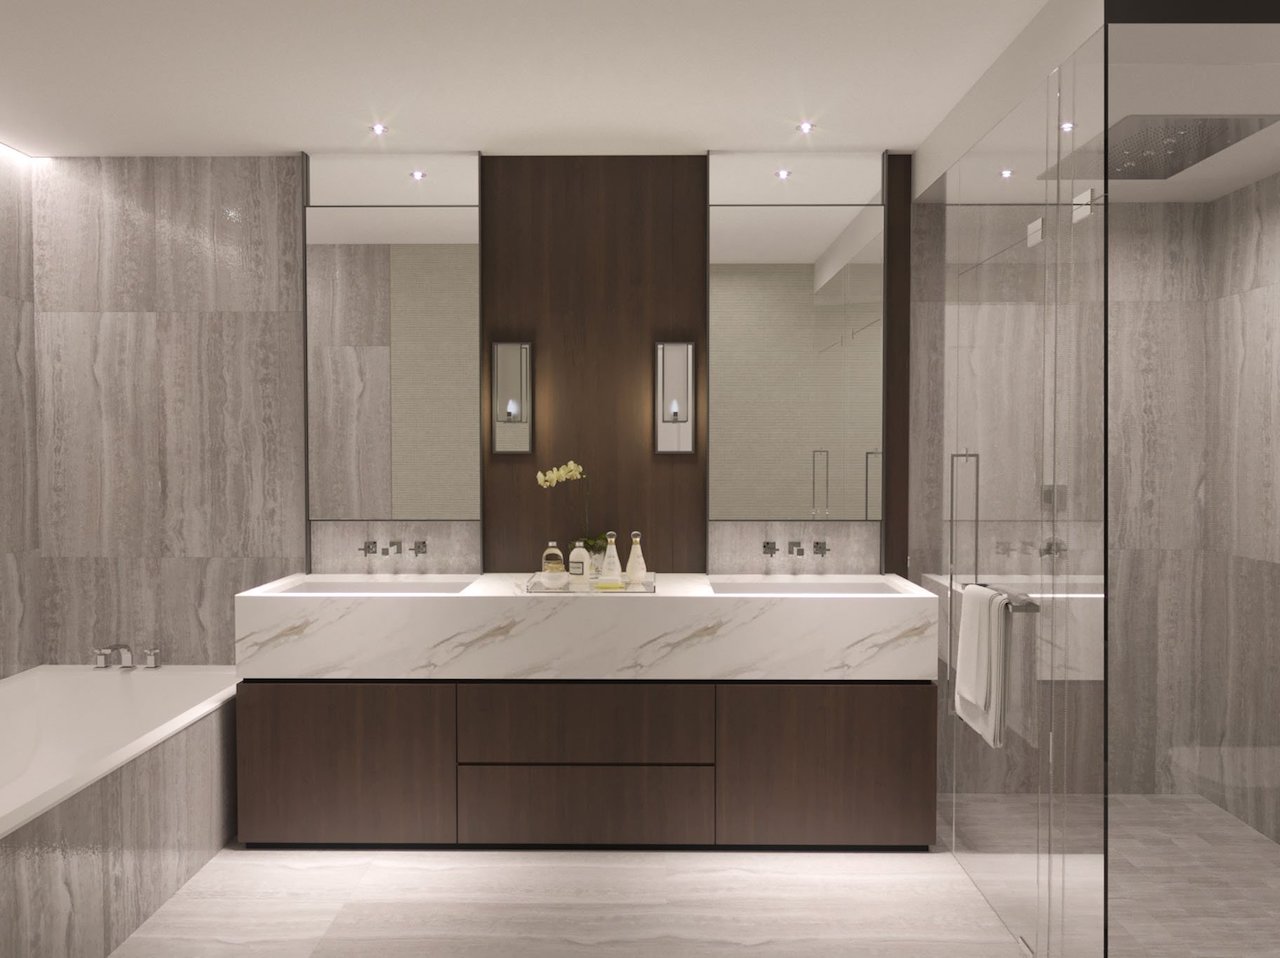 Full bathroom rendering of One Forest Hill Condos.